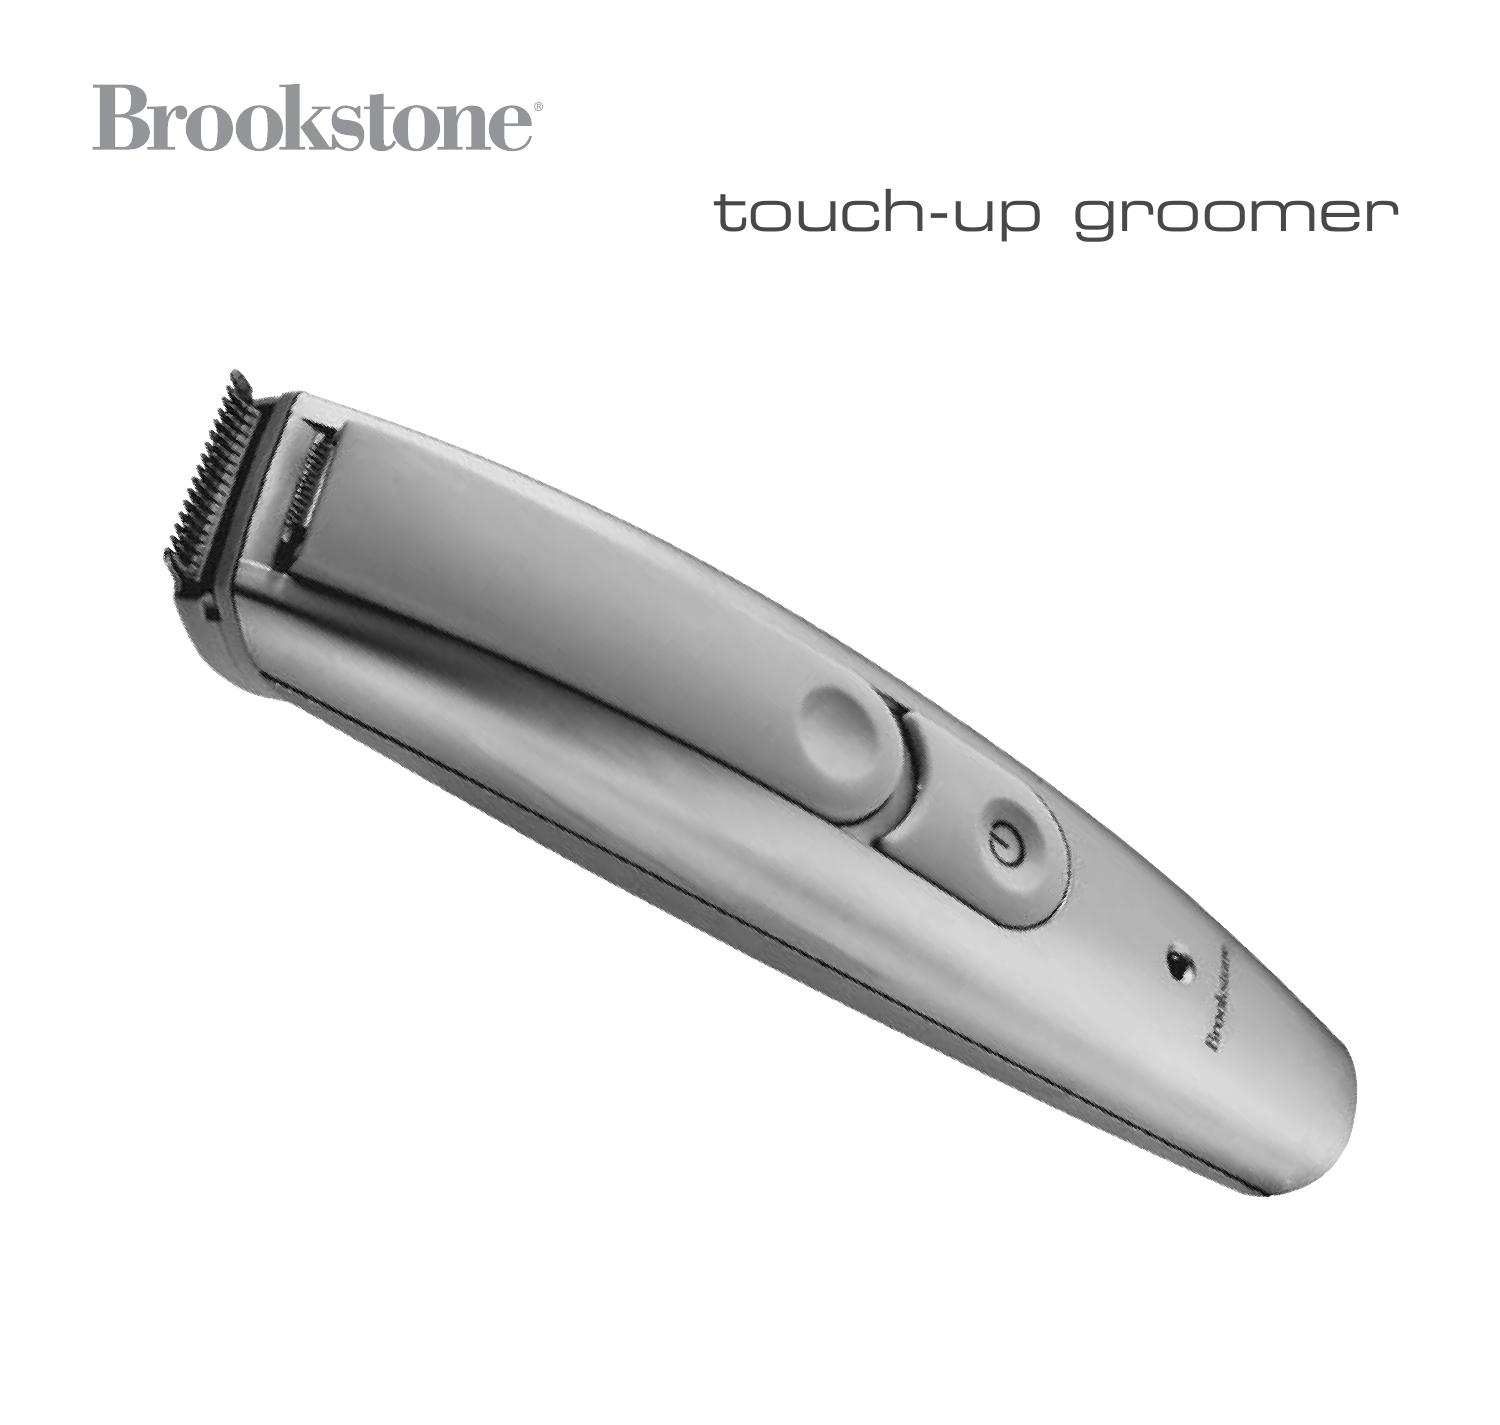 Brookstone Electric Shaver Electric Shaver User Manual